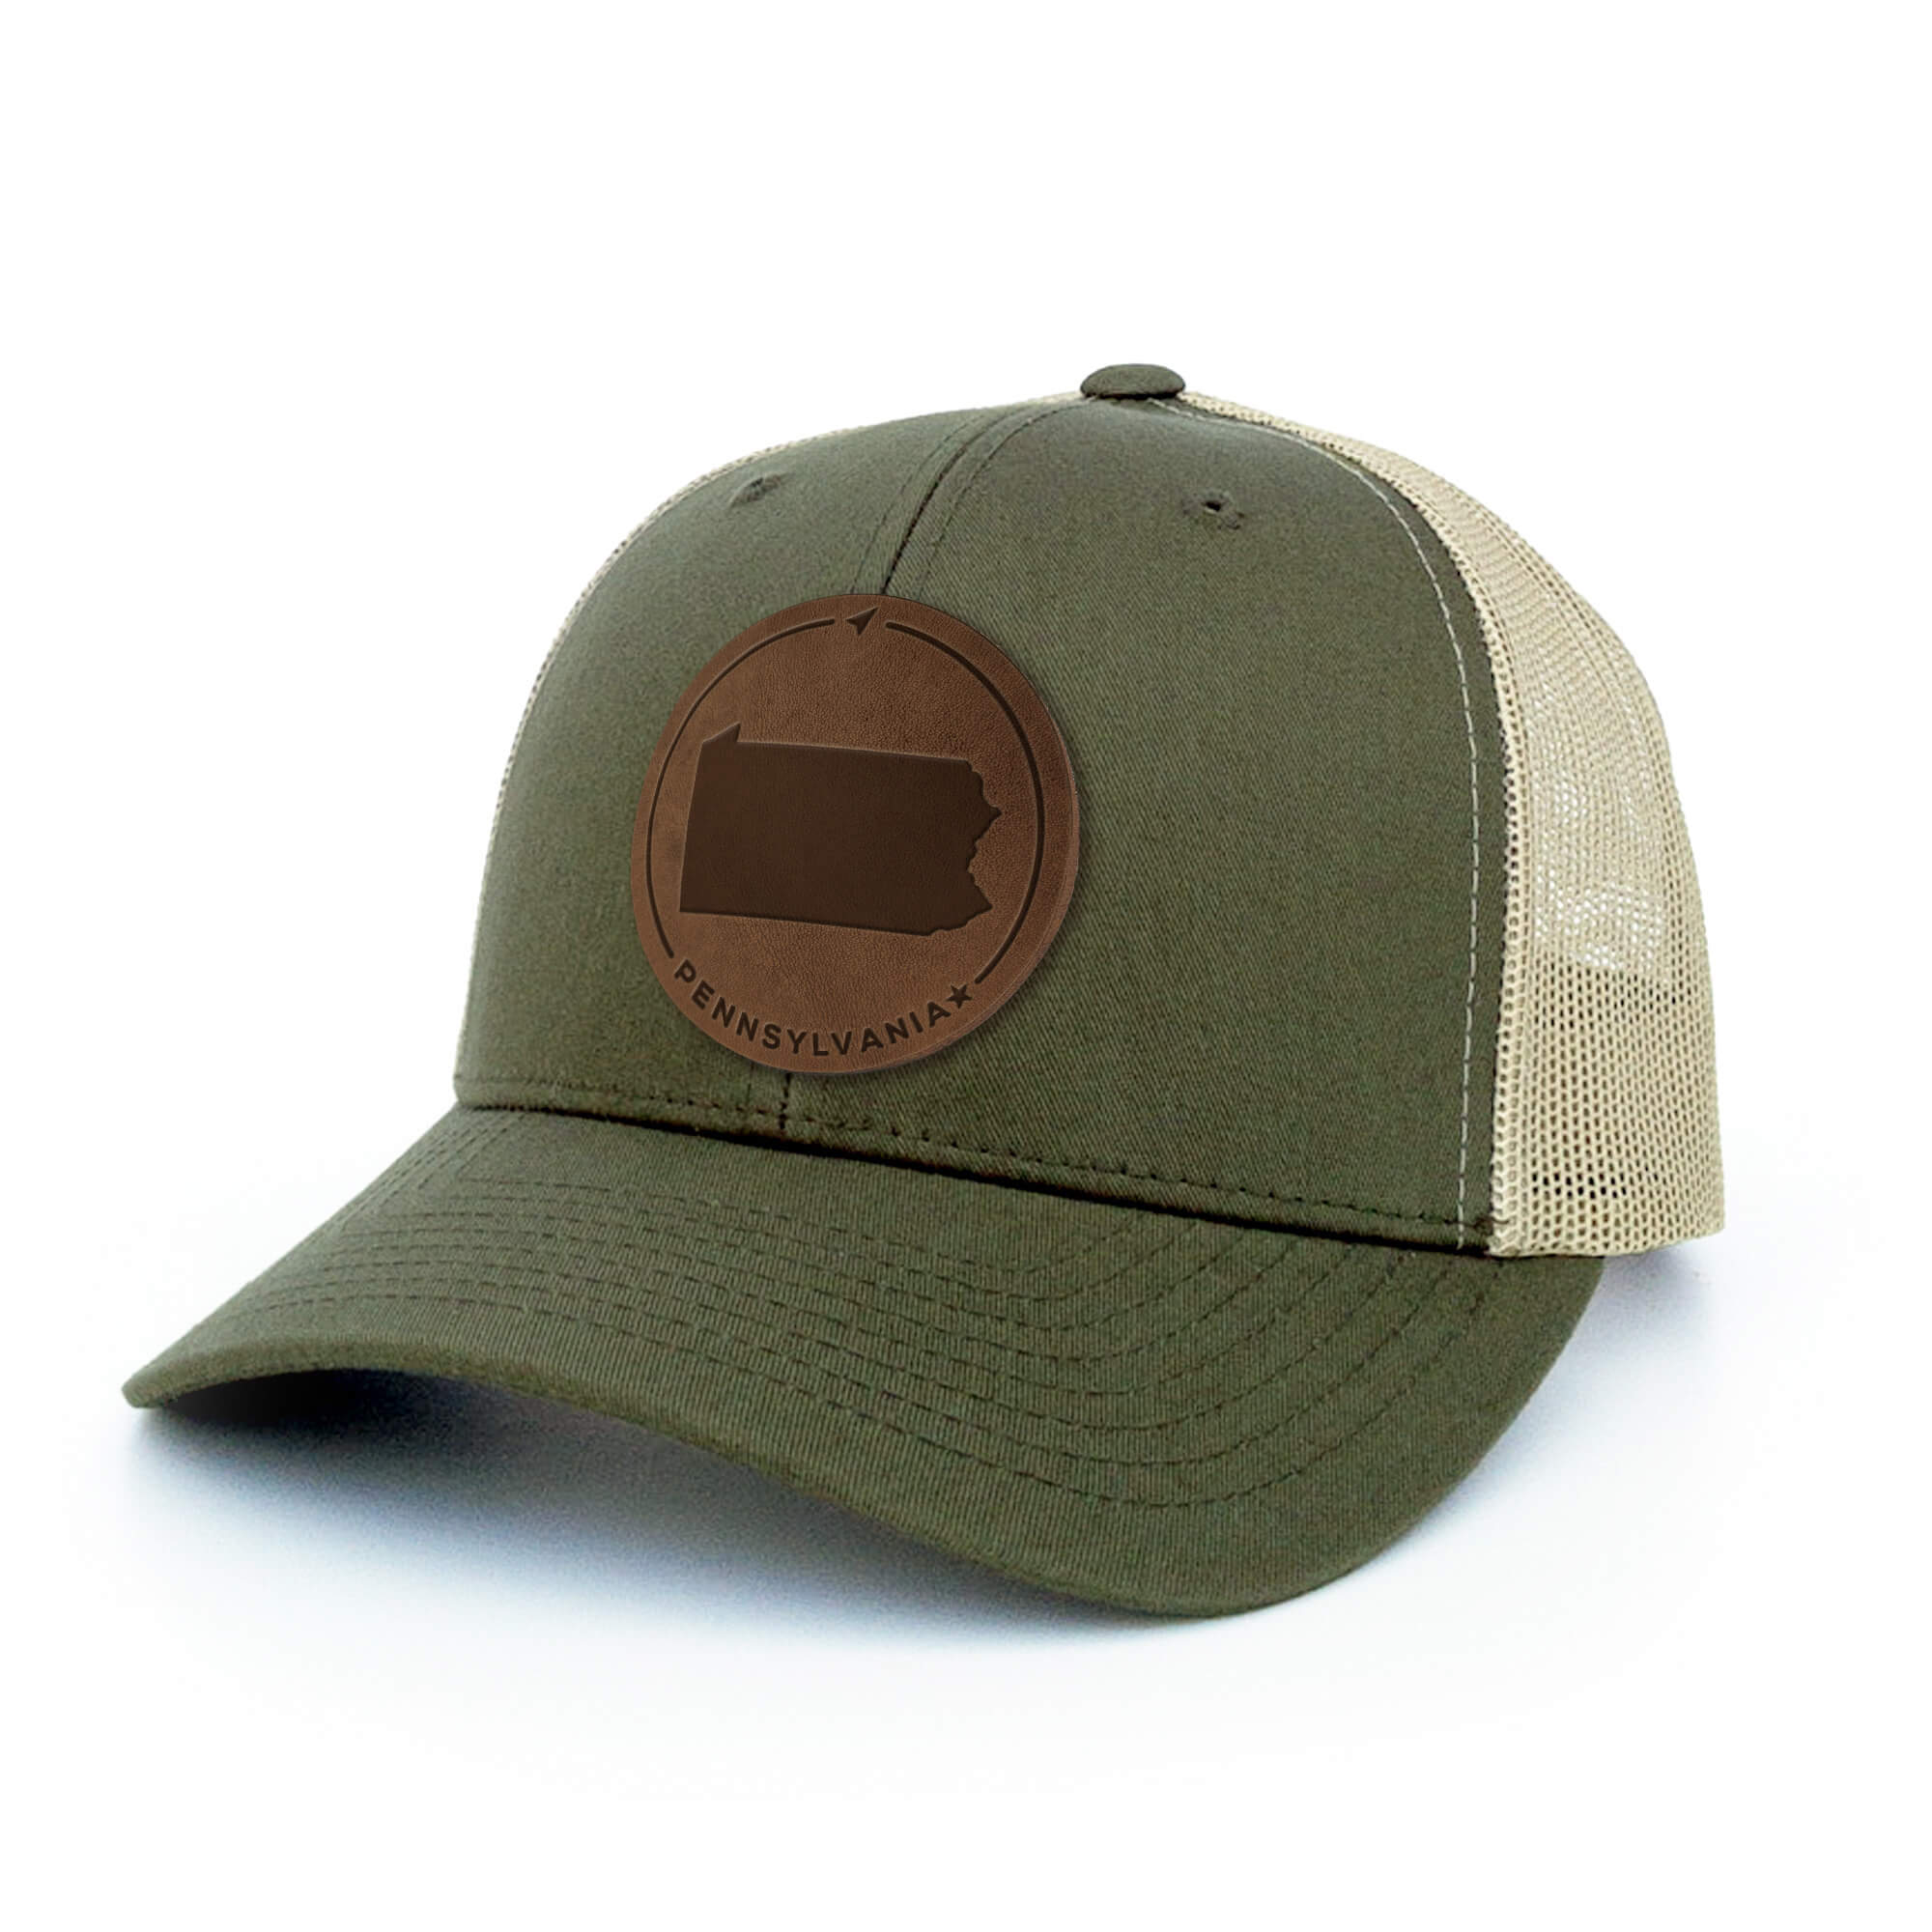 Moss Green and khaki trucker hat with full-grain leather patch of Pennsylvania | BLACK-003-003, CHARC-003-003, NAVY-003-003, HGREY-003-003, MOSS-003-003, BROWN-003-003